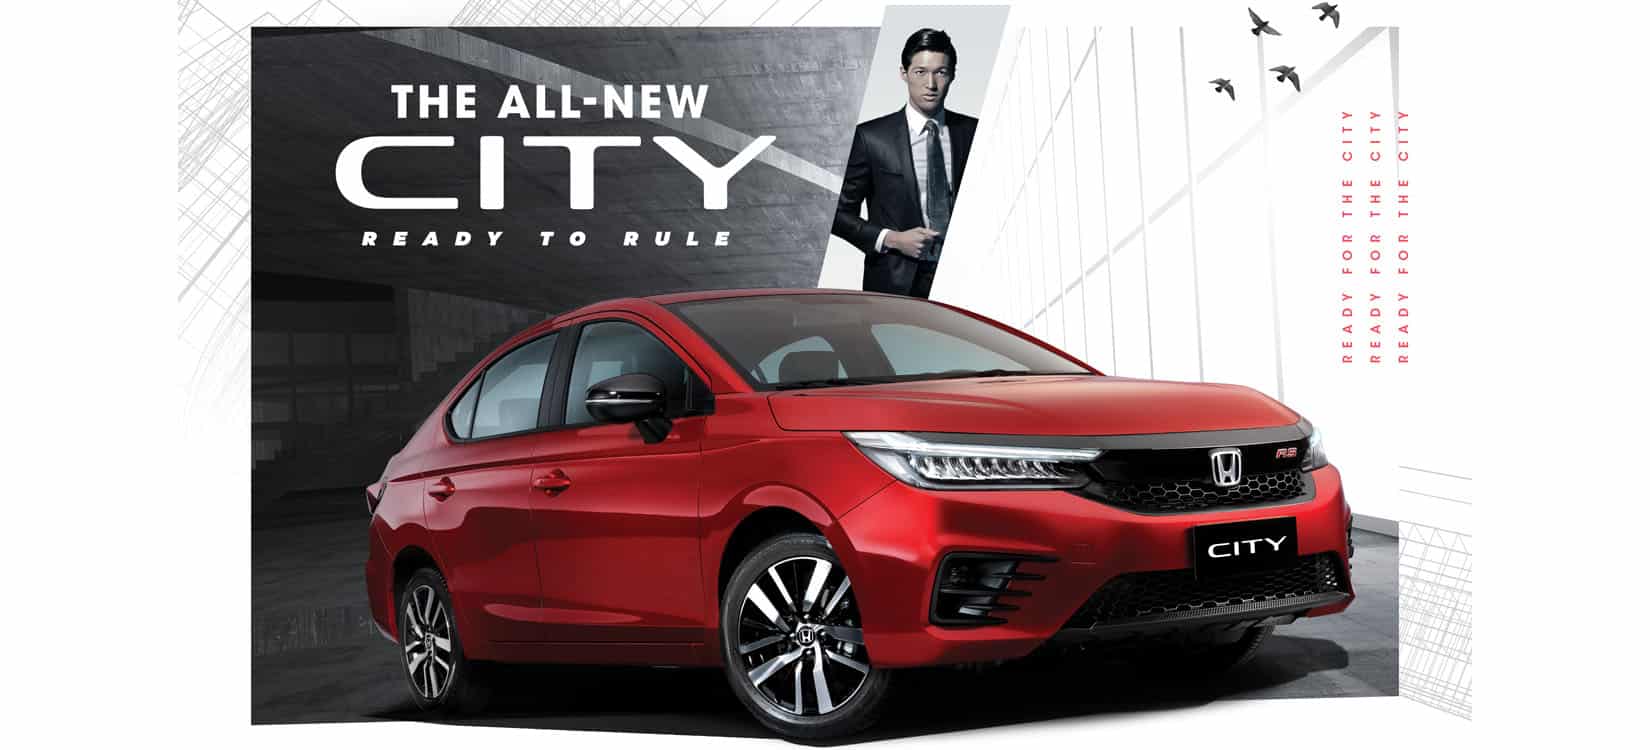 Honda officially launches the 5th generation All-New City